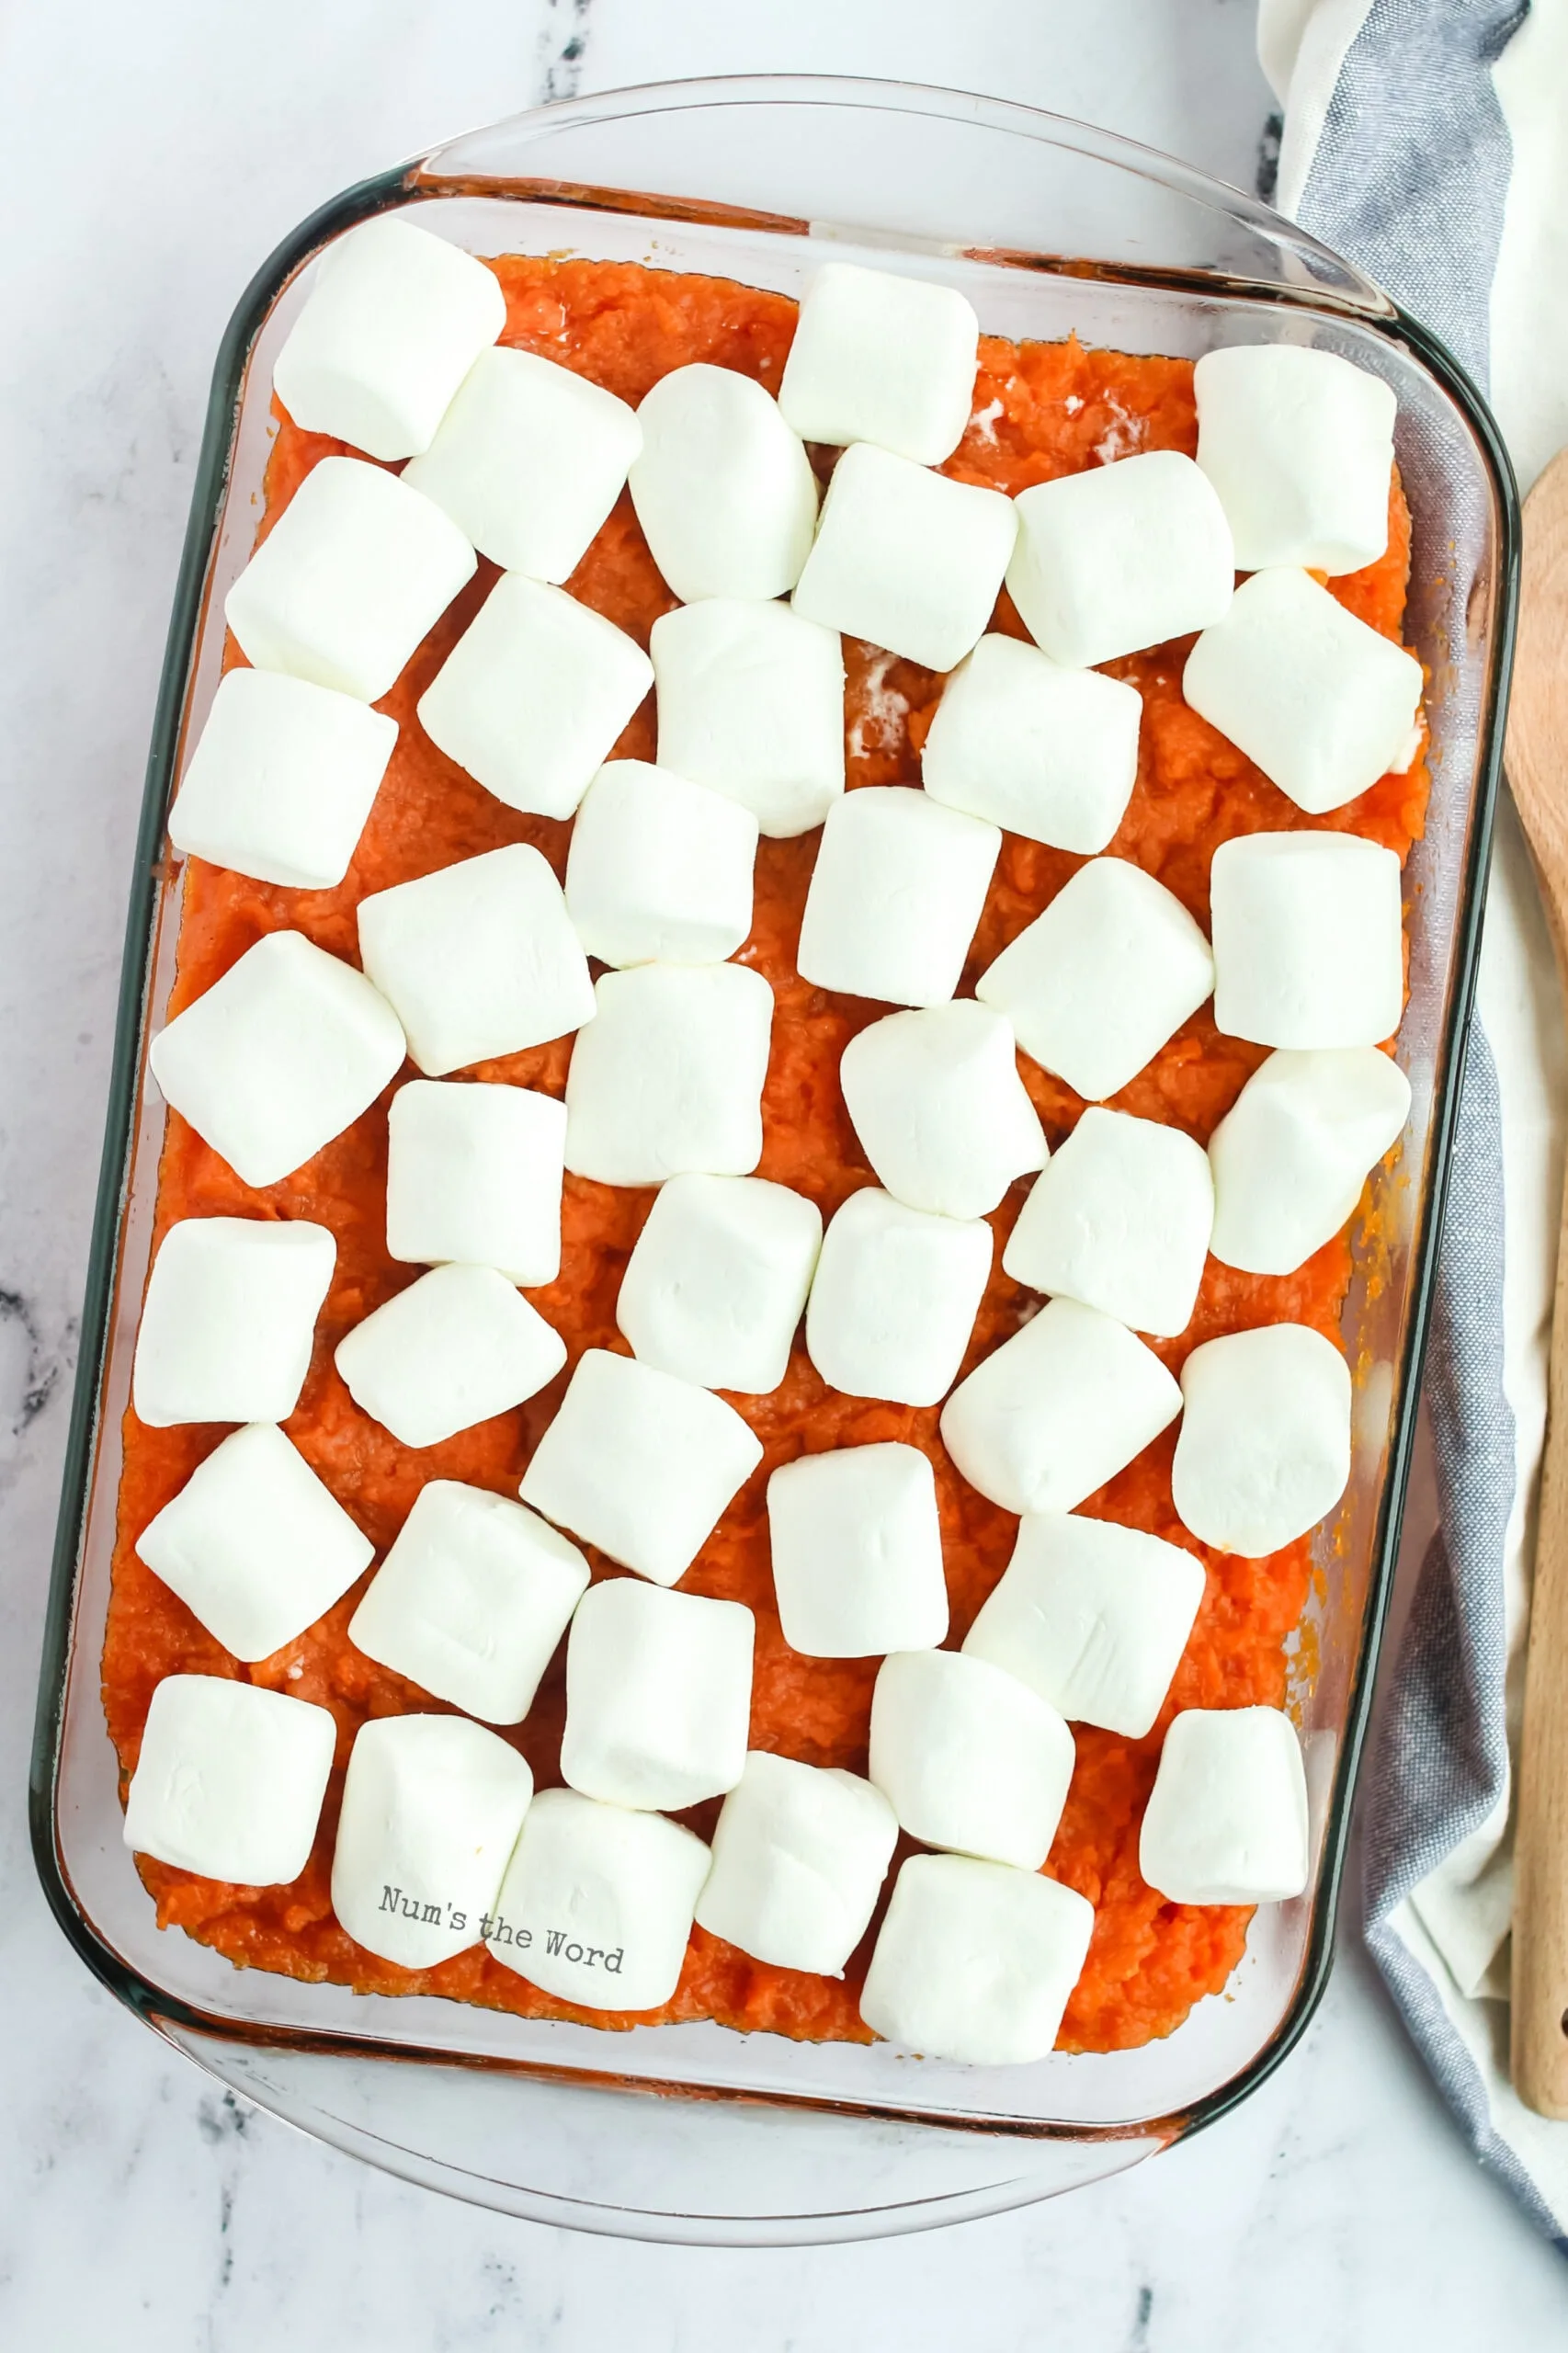 large marshmallows placed on top of the mashed sweet potatoes, not baked